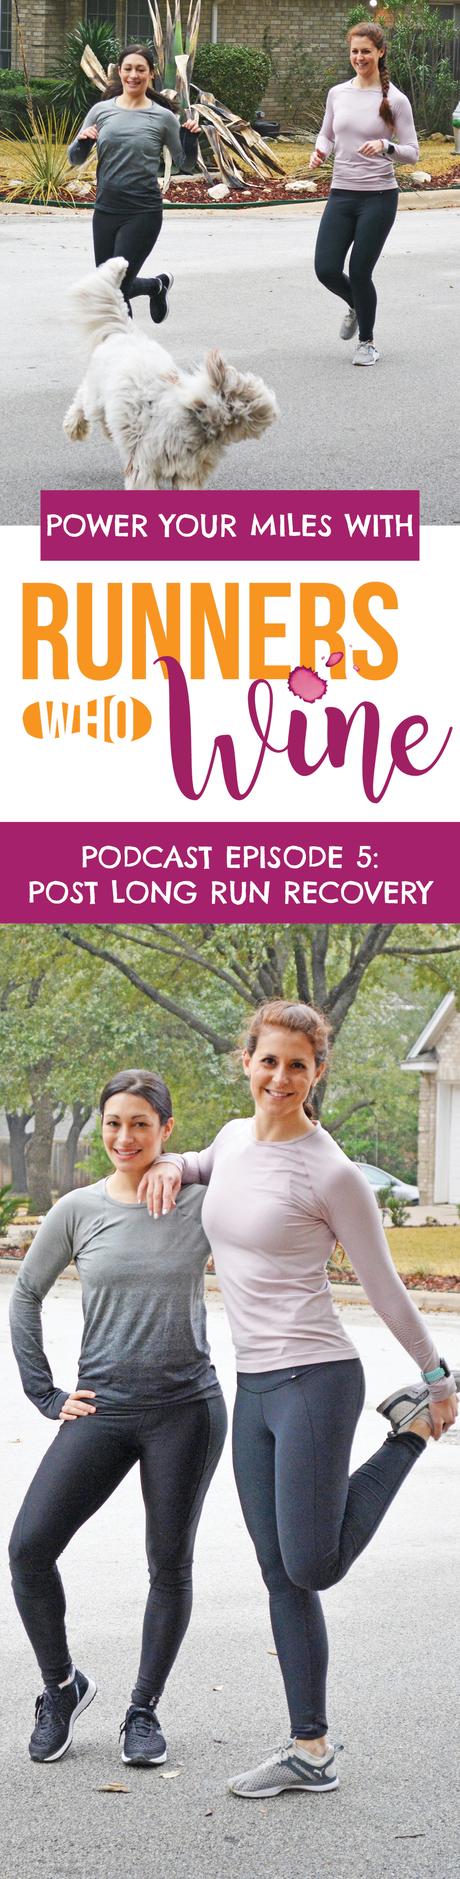 Runners Who Wine Episode 5: Post Long Run Recovery